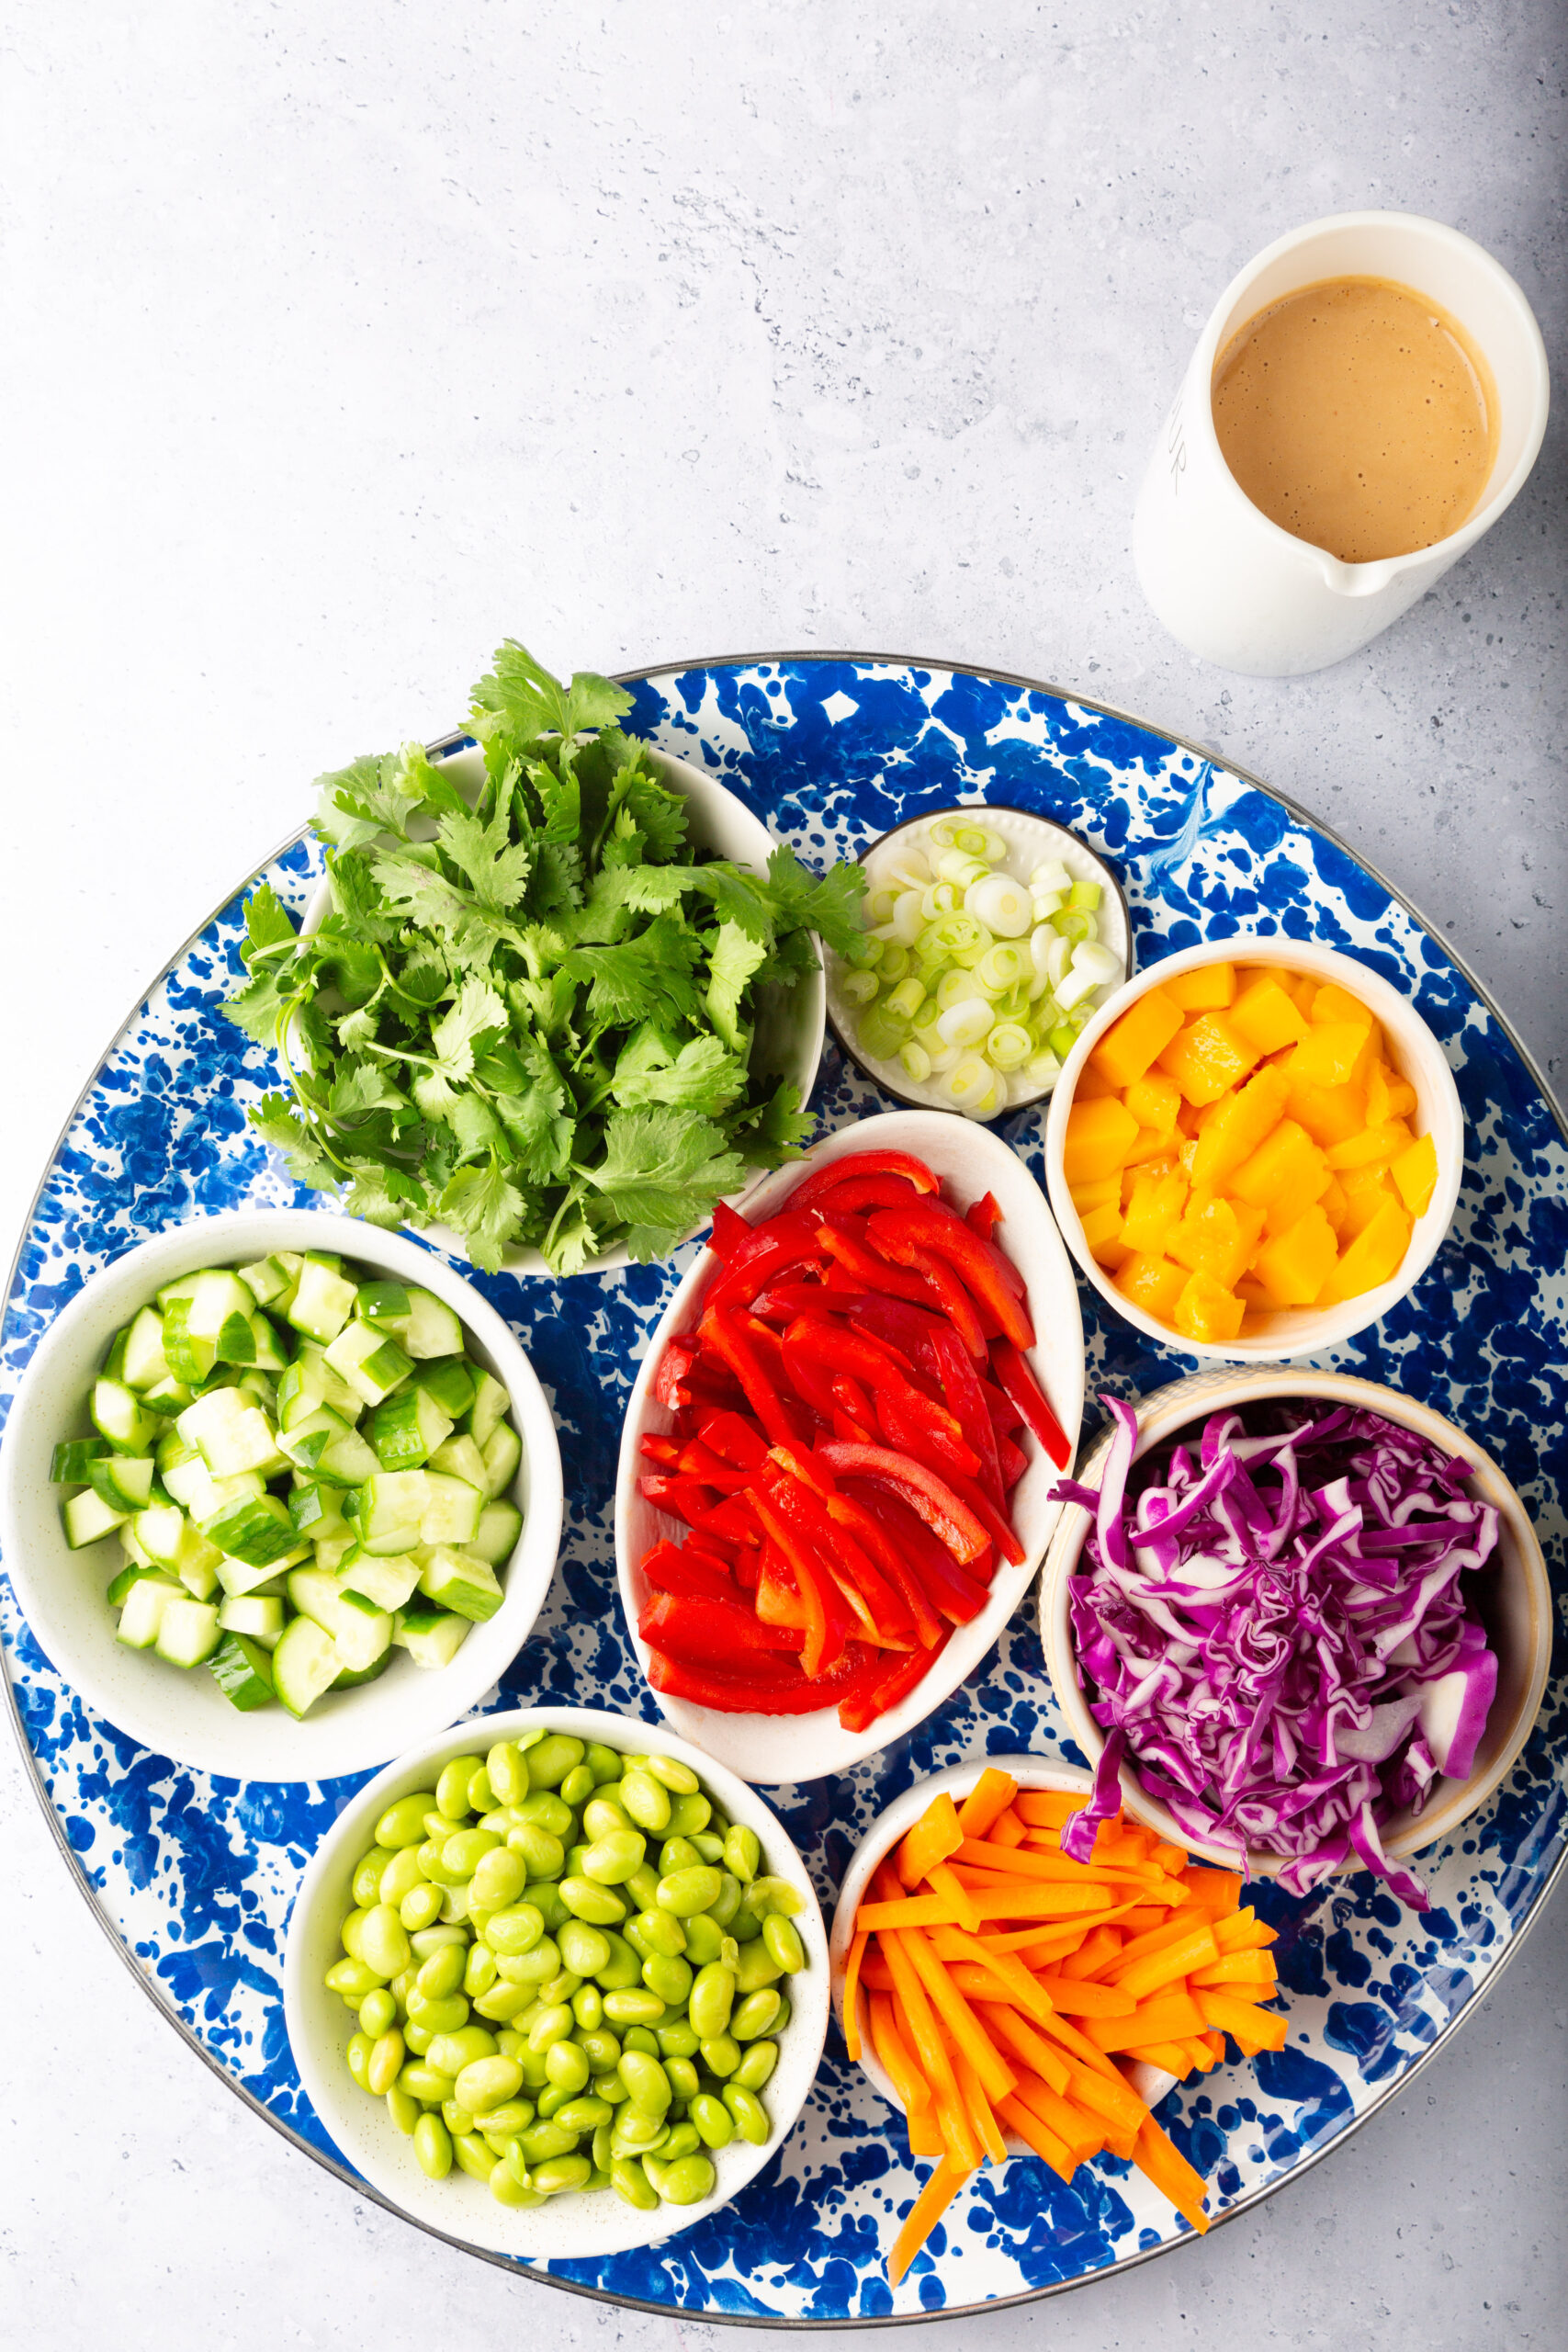 There are several types of vegetables visible. This includes what appears to be thinly sliced red bell peppers, shredded purple cabbage, and possibly some green leafy vegetables.